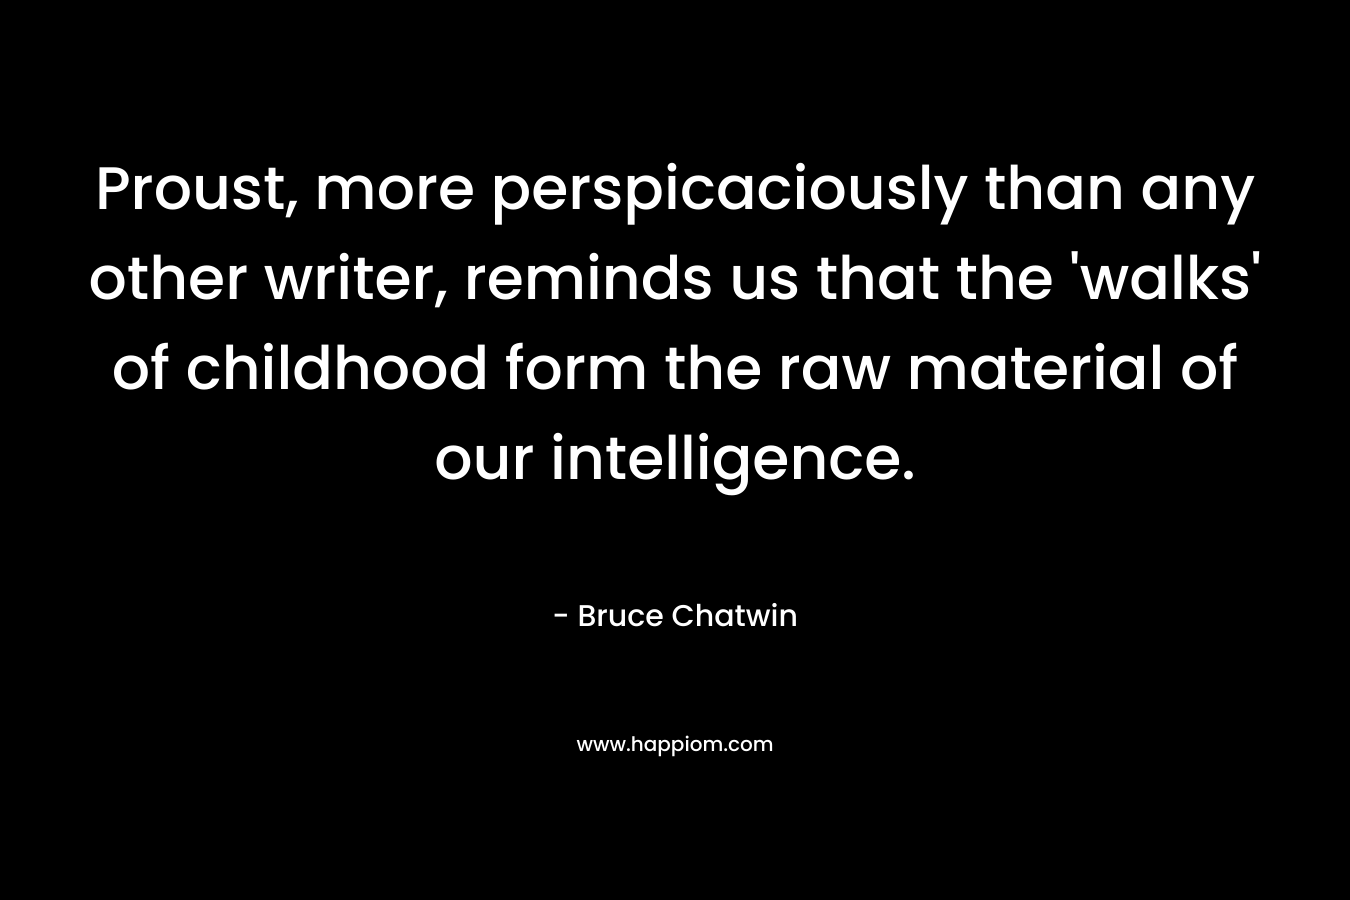 Proust, more perspicaciously than any other writer, reminds us that the ‘walks’ of childhood form the raw material of our intelligence. – Bruce Chatwin